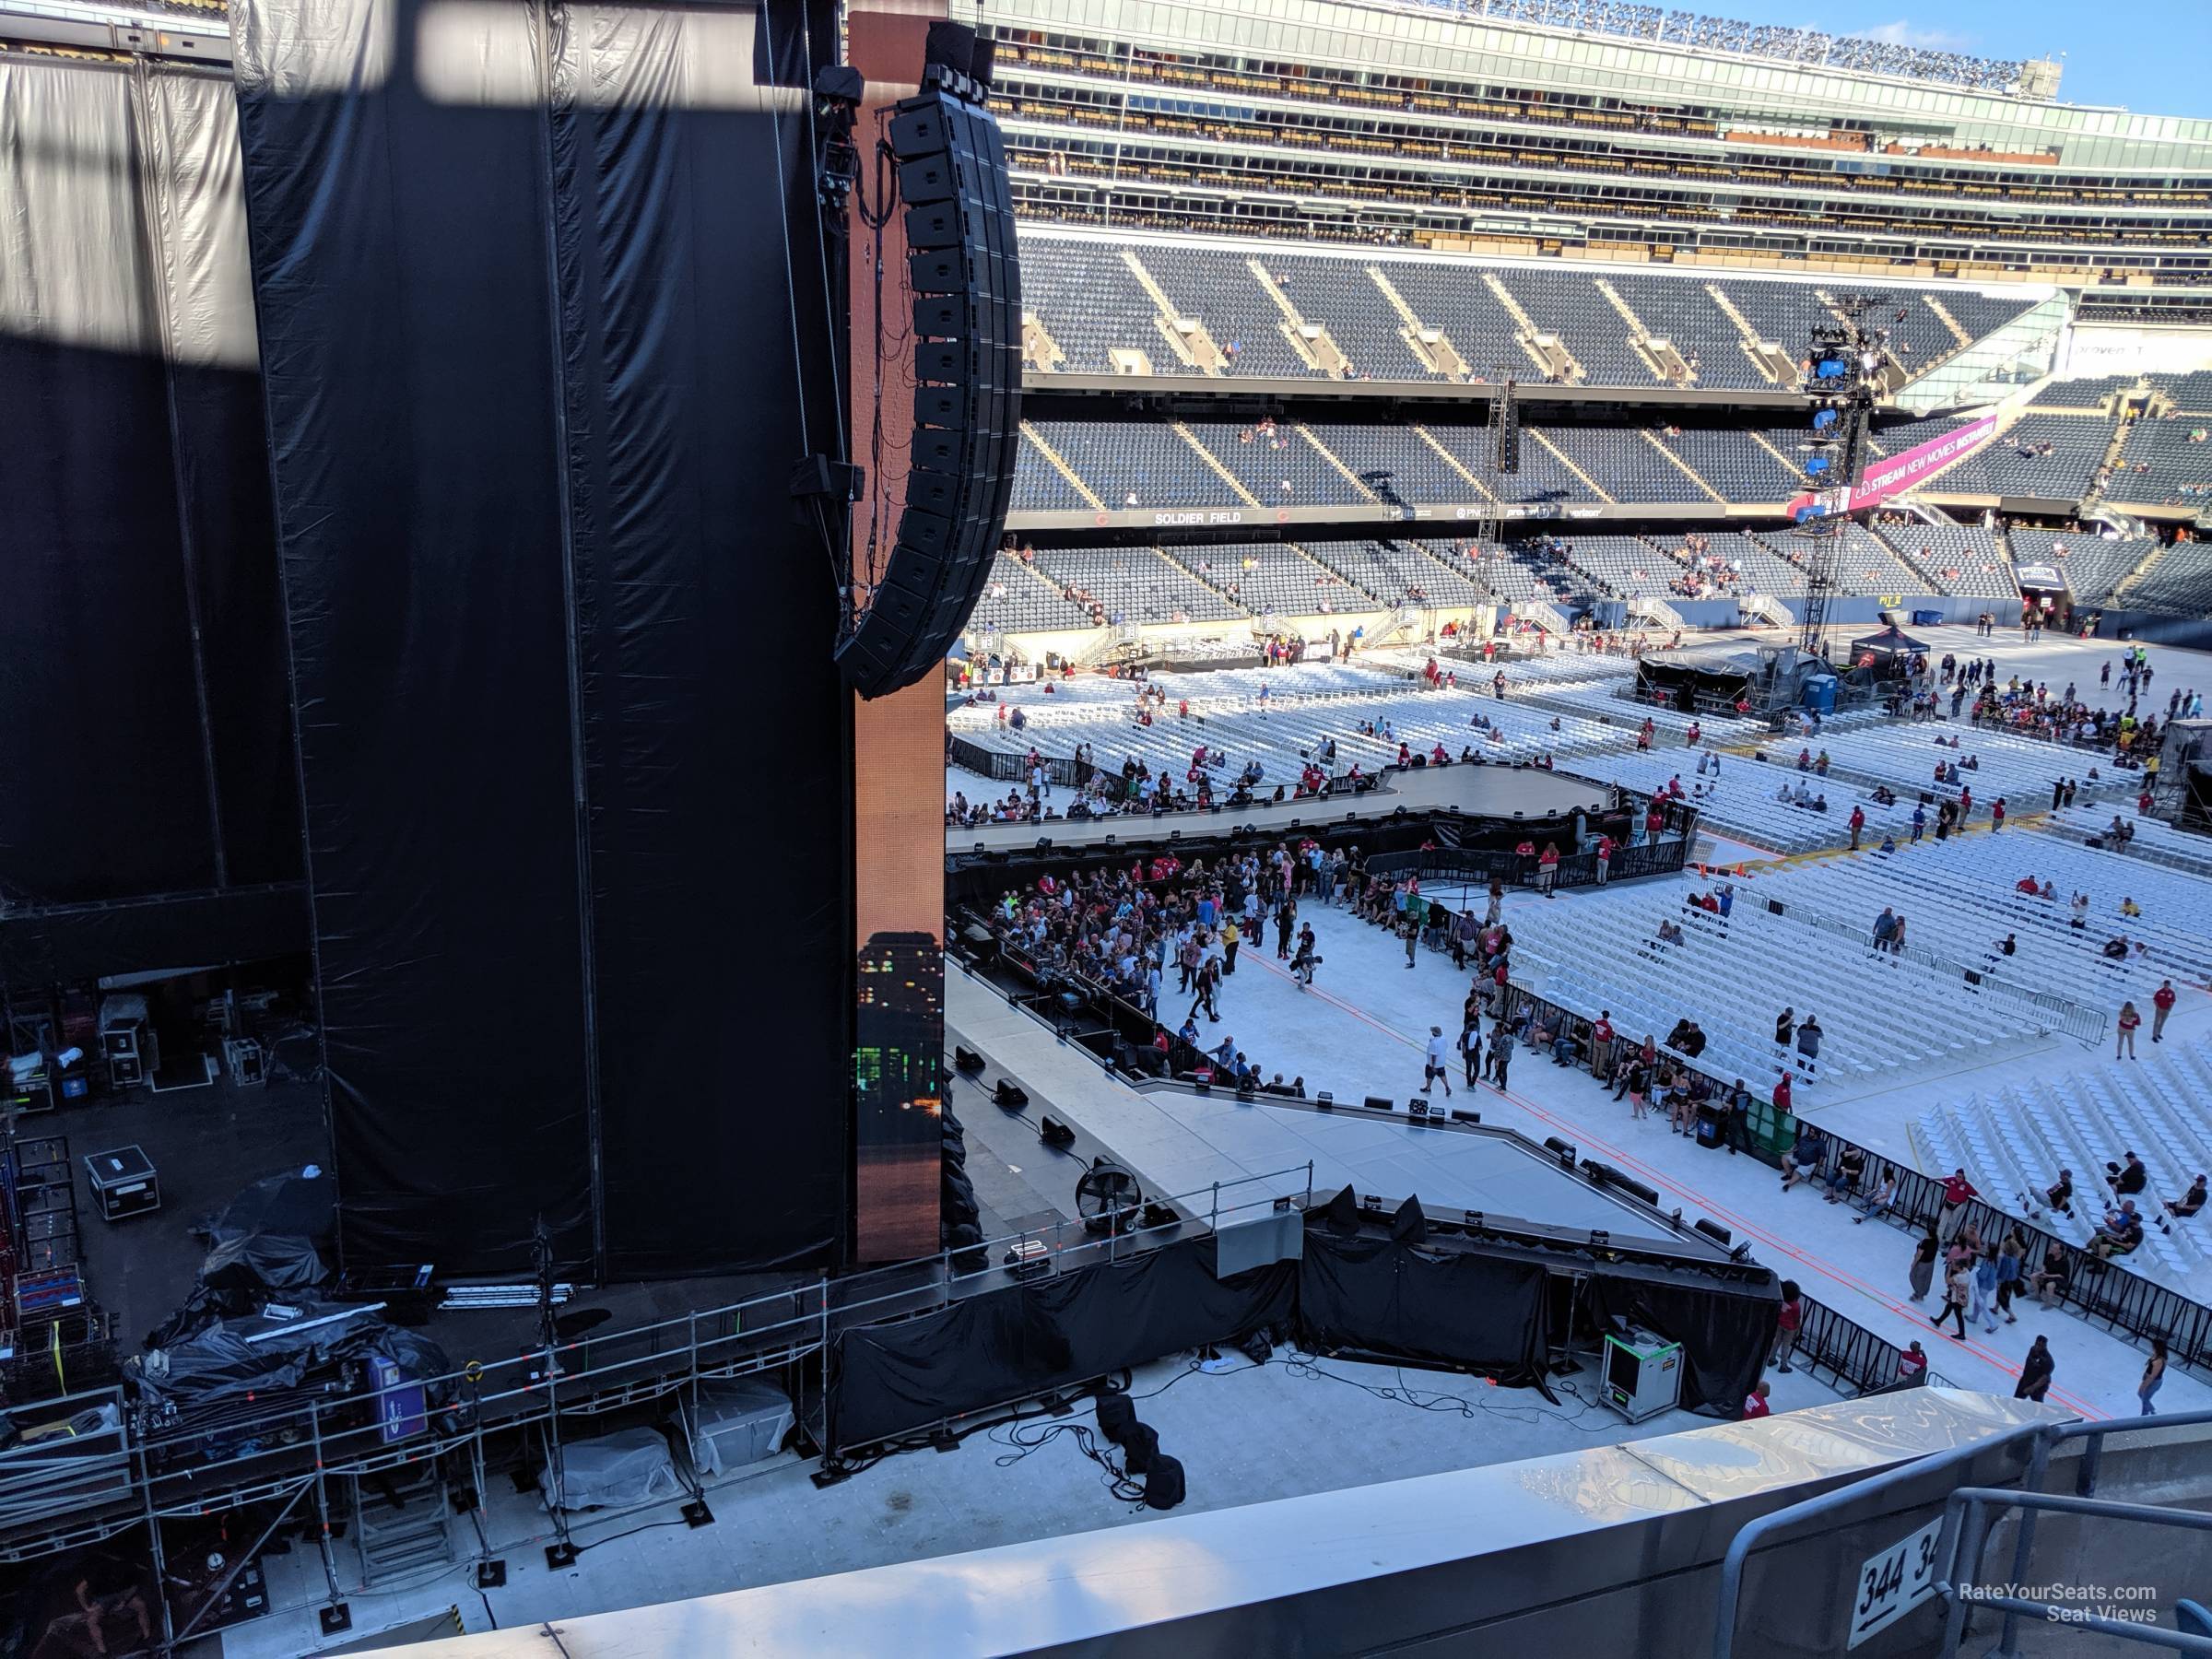 section 344, row 6 seat view  for concert - soldier field